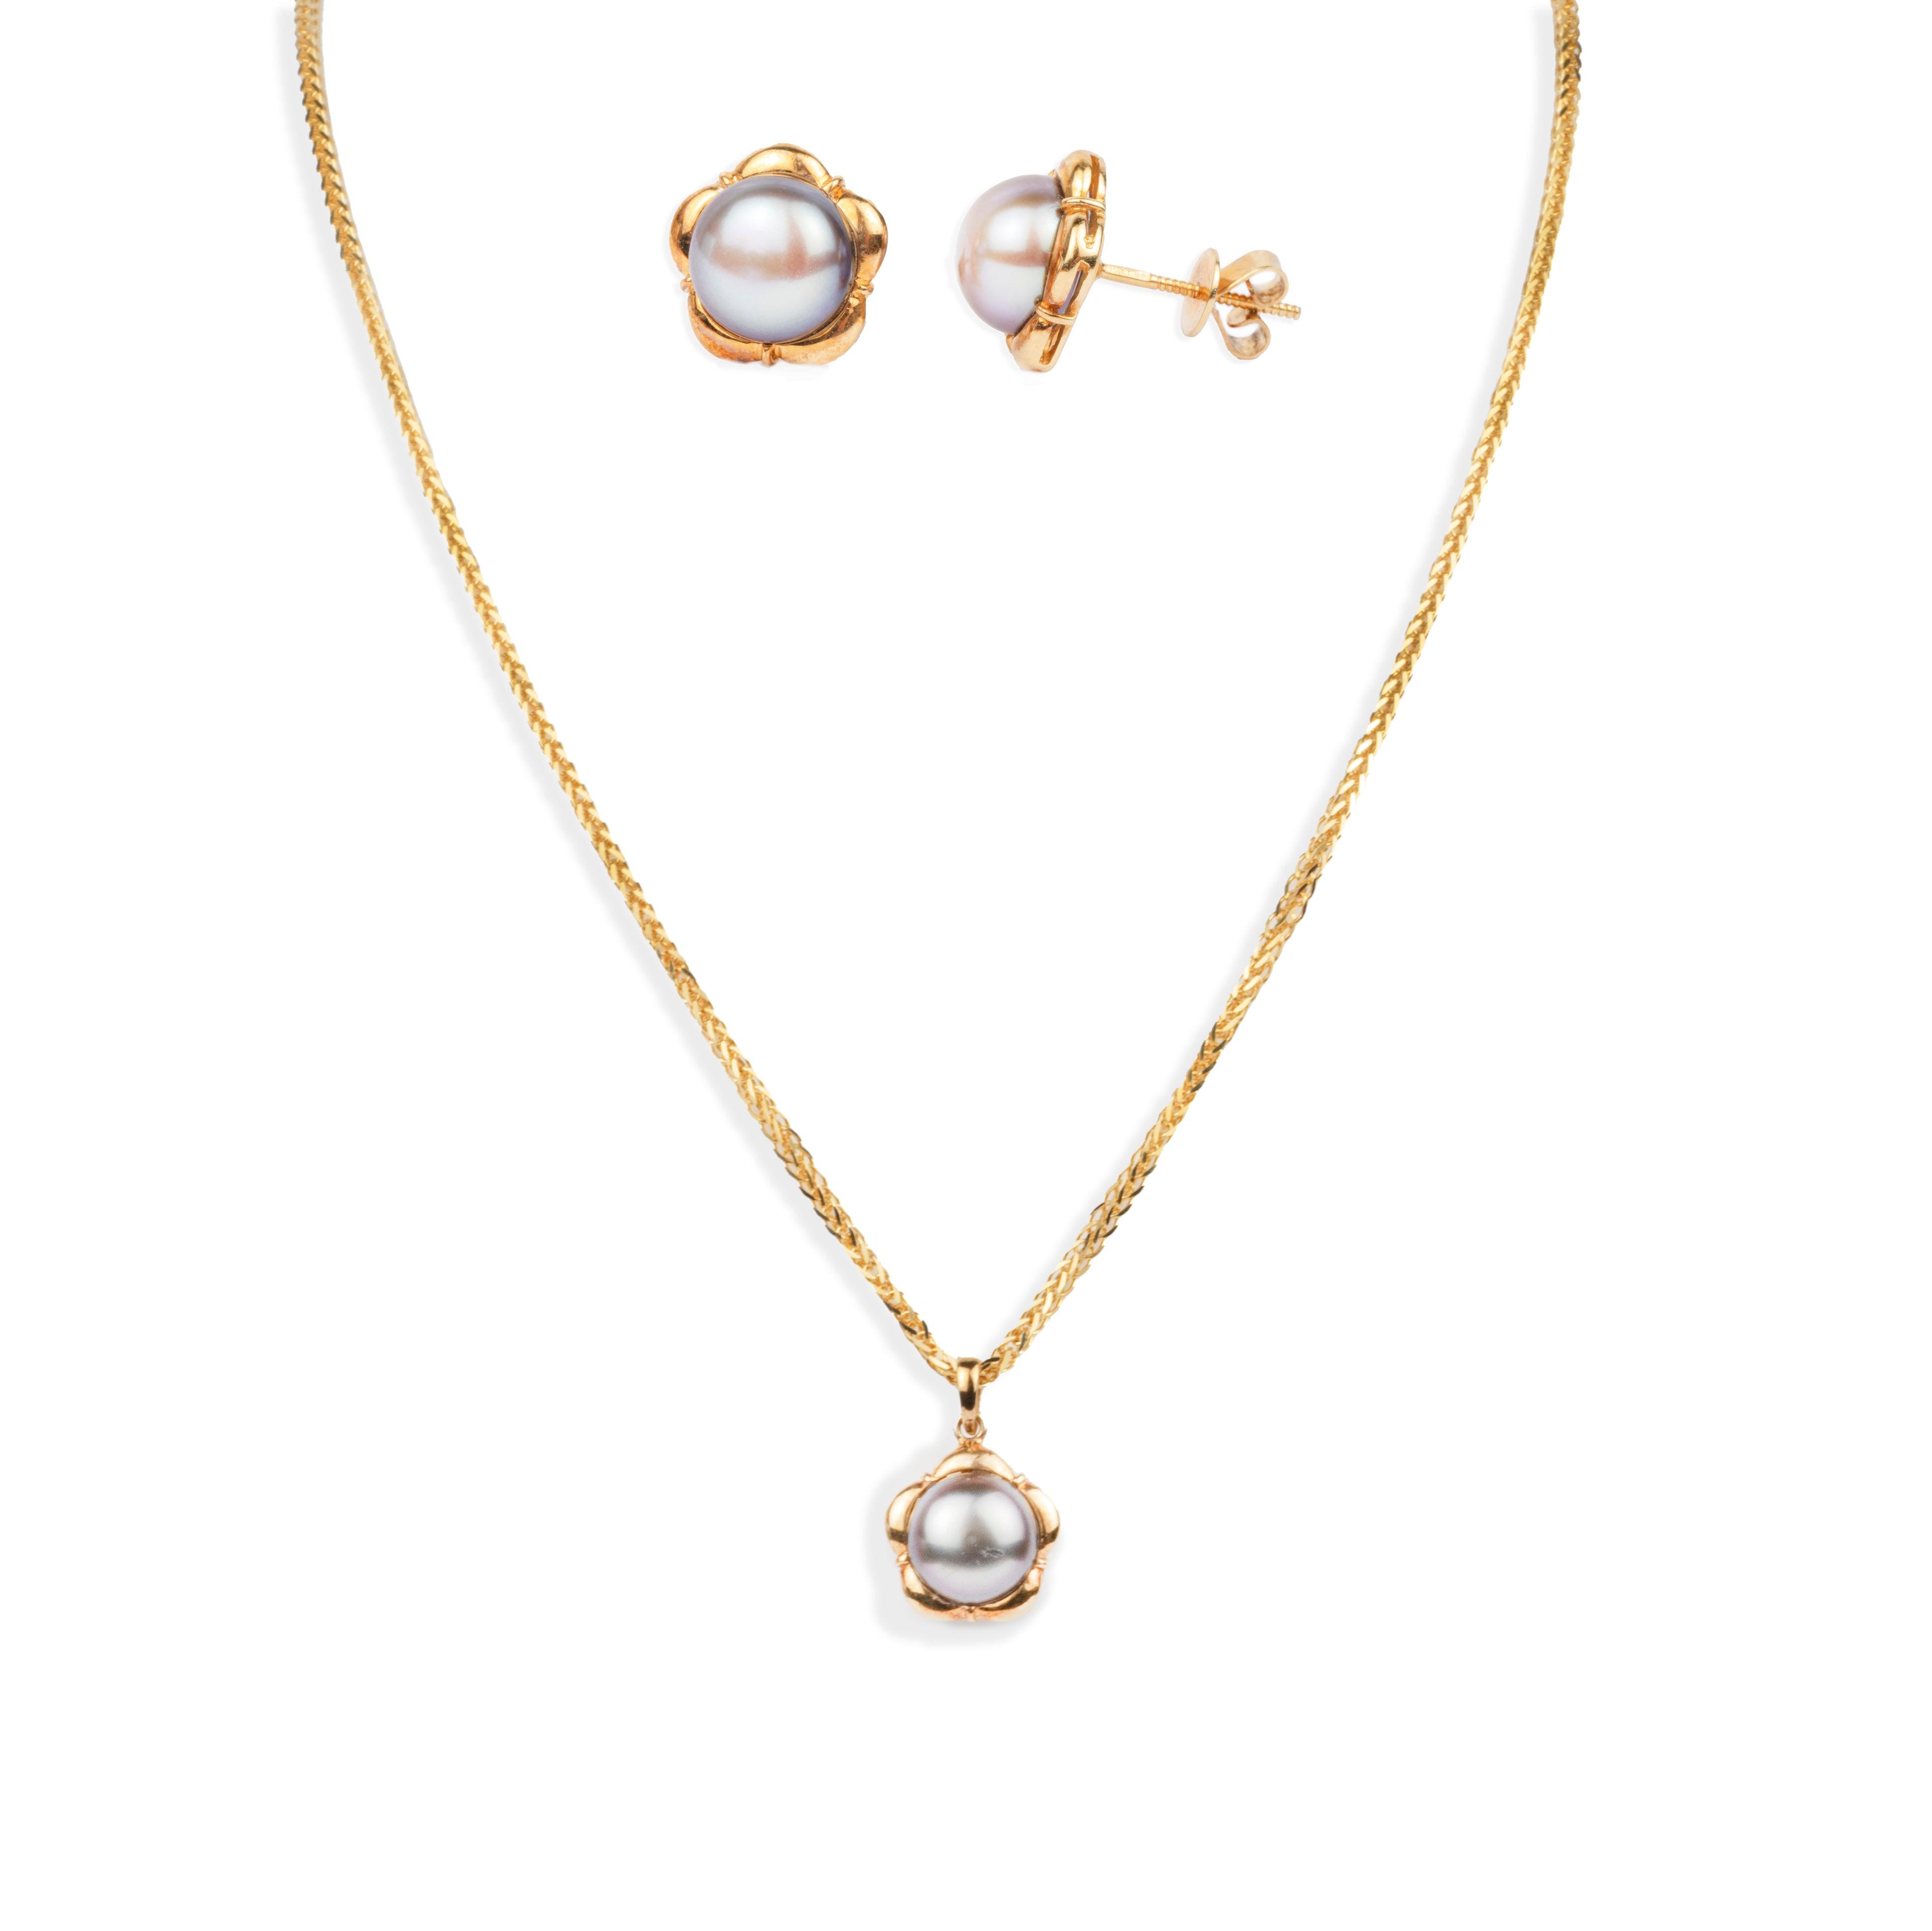 18ct Yellow Gold Necklace, Pendant and Earrings set with Black Cultured Pearl (16.6g) N&P&E-5532 - Minar Jewellers